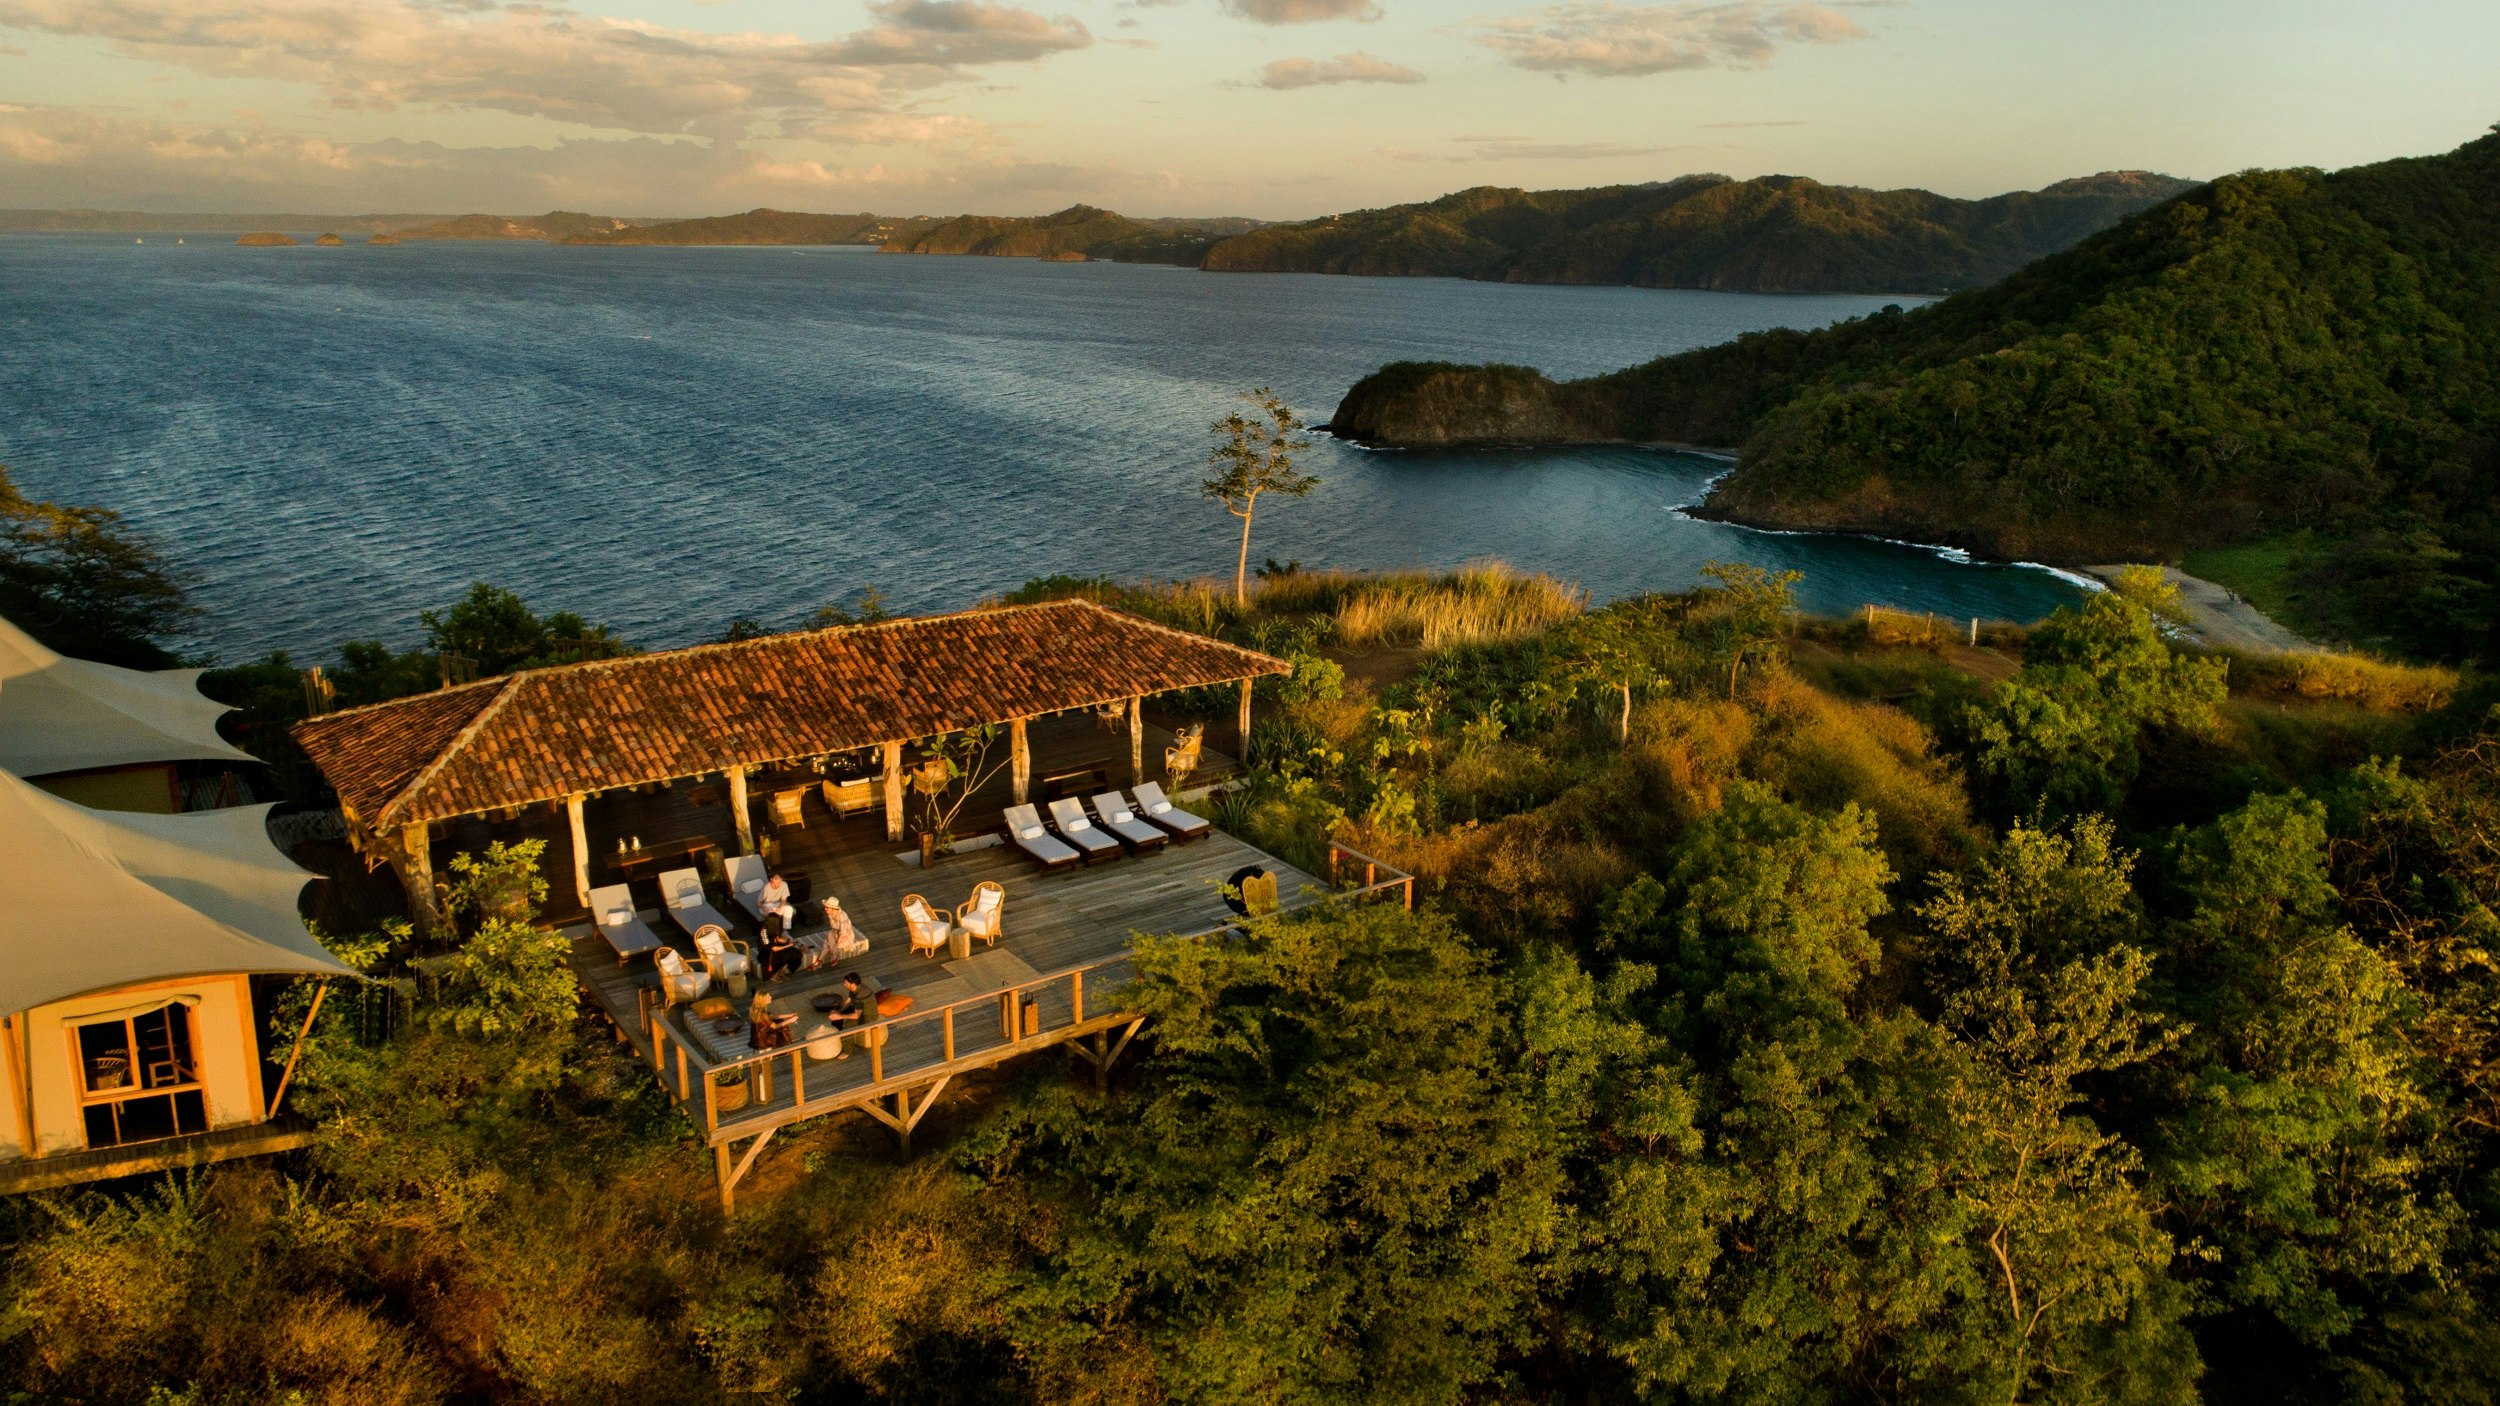 Aerial view of a wooden building near a beach on the edge of dense forest. The deck has several people on loungers or sat at the tables. Luxury tents are to the left